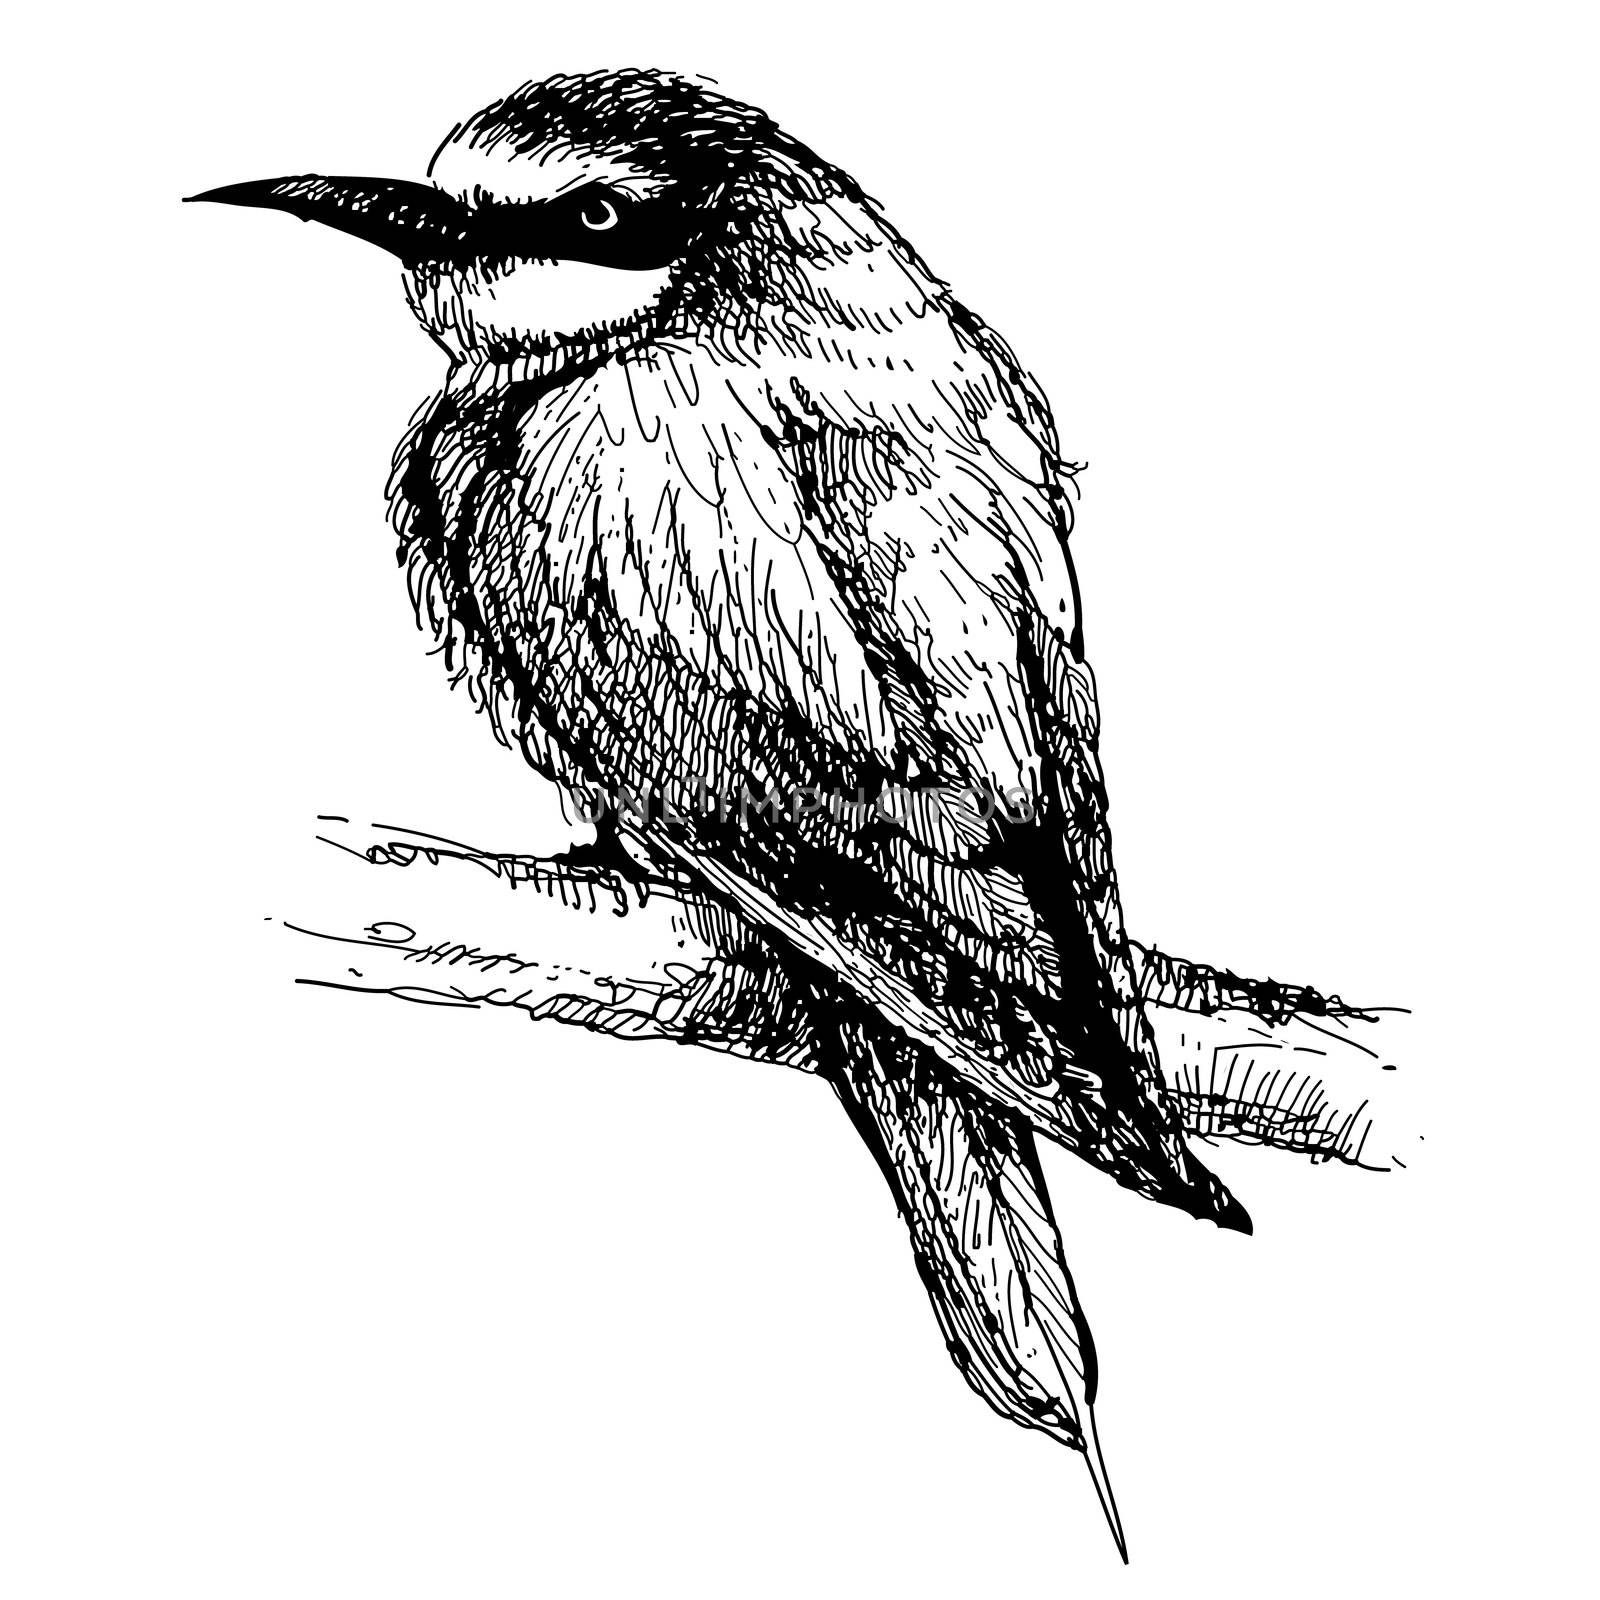 Bee-eater bird doodle hand drawn by simpleBE